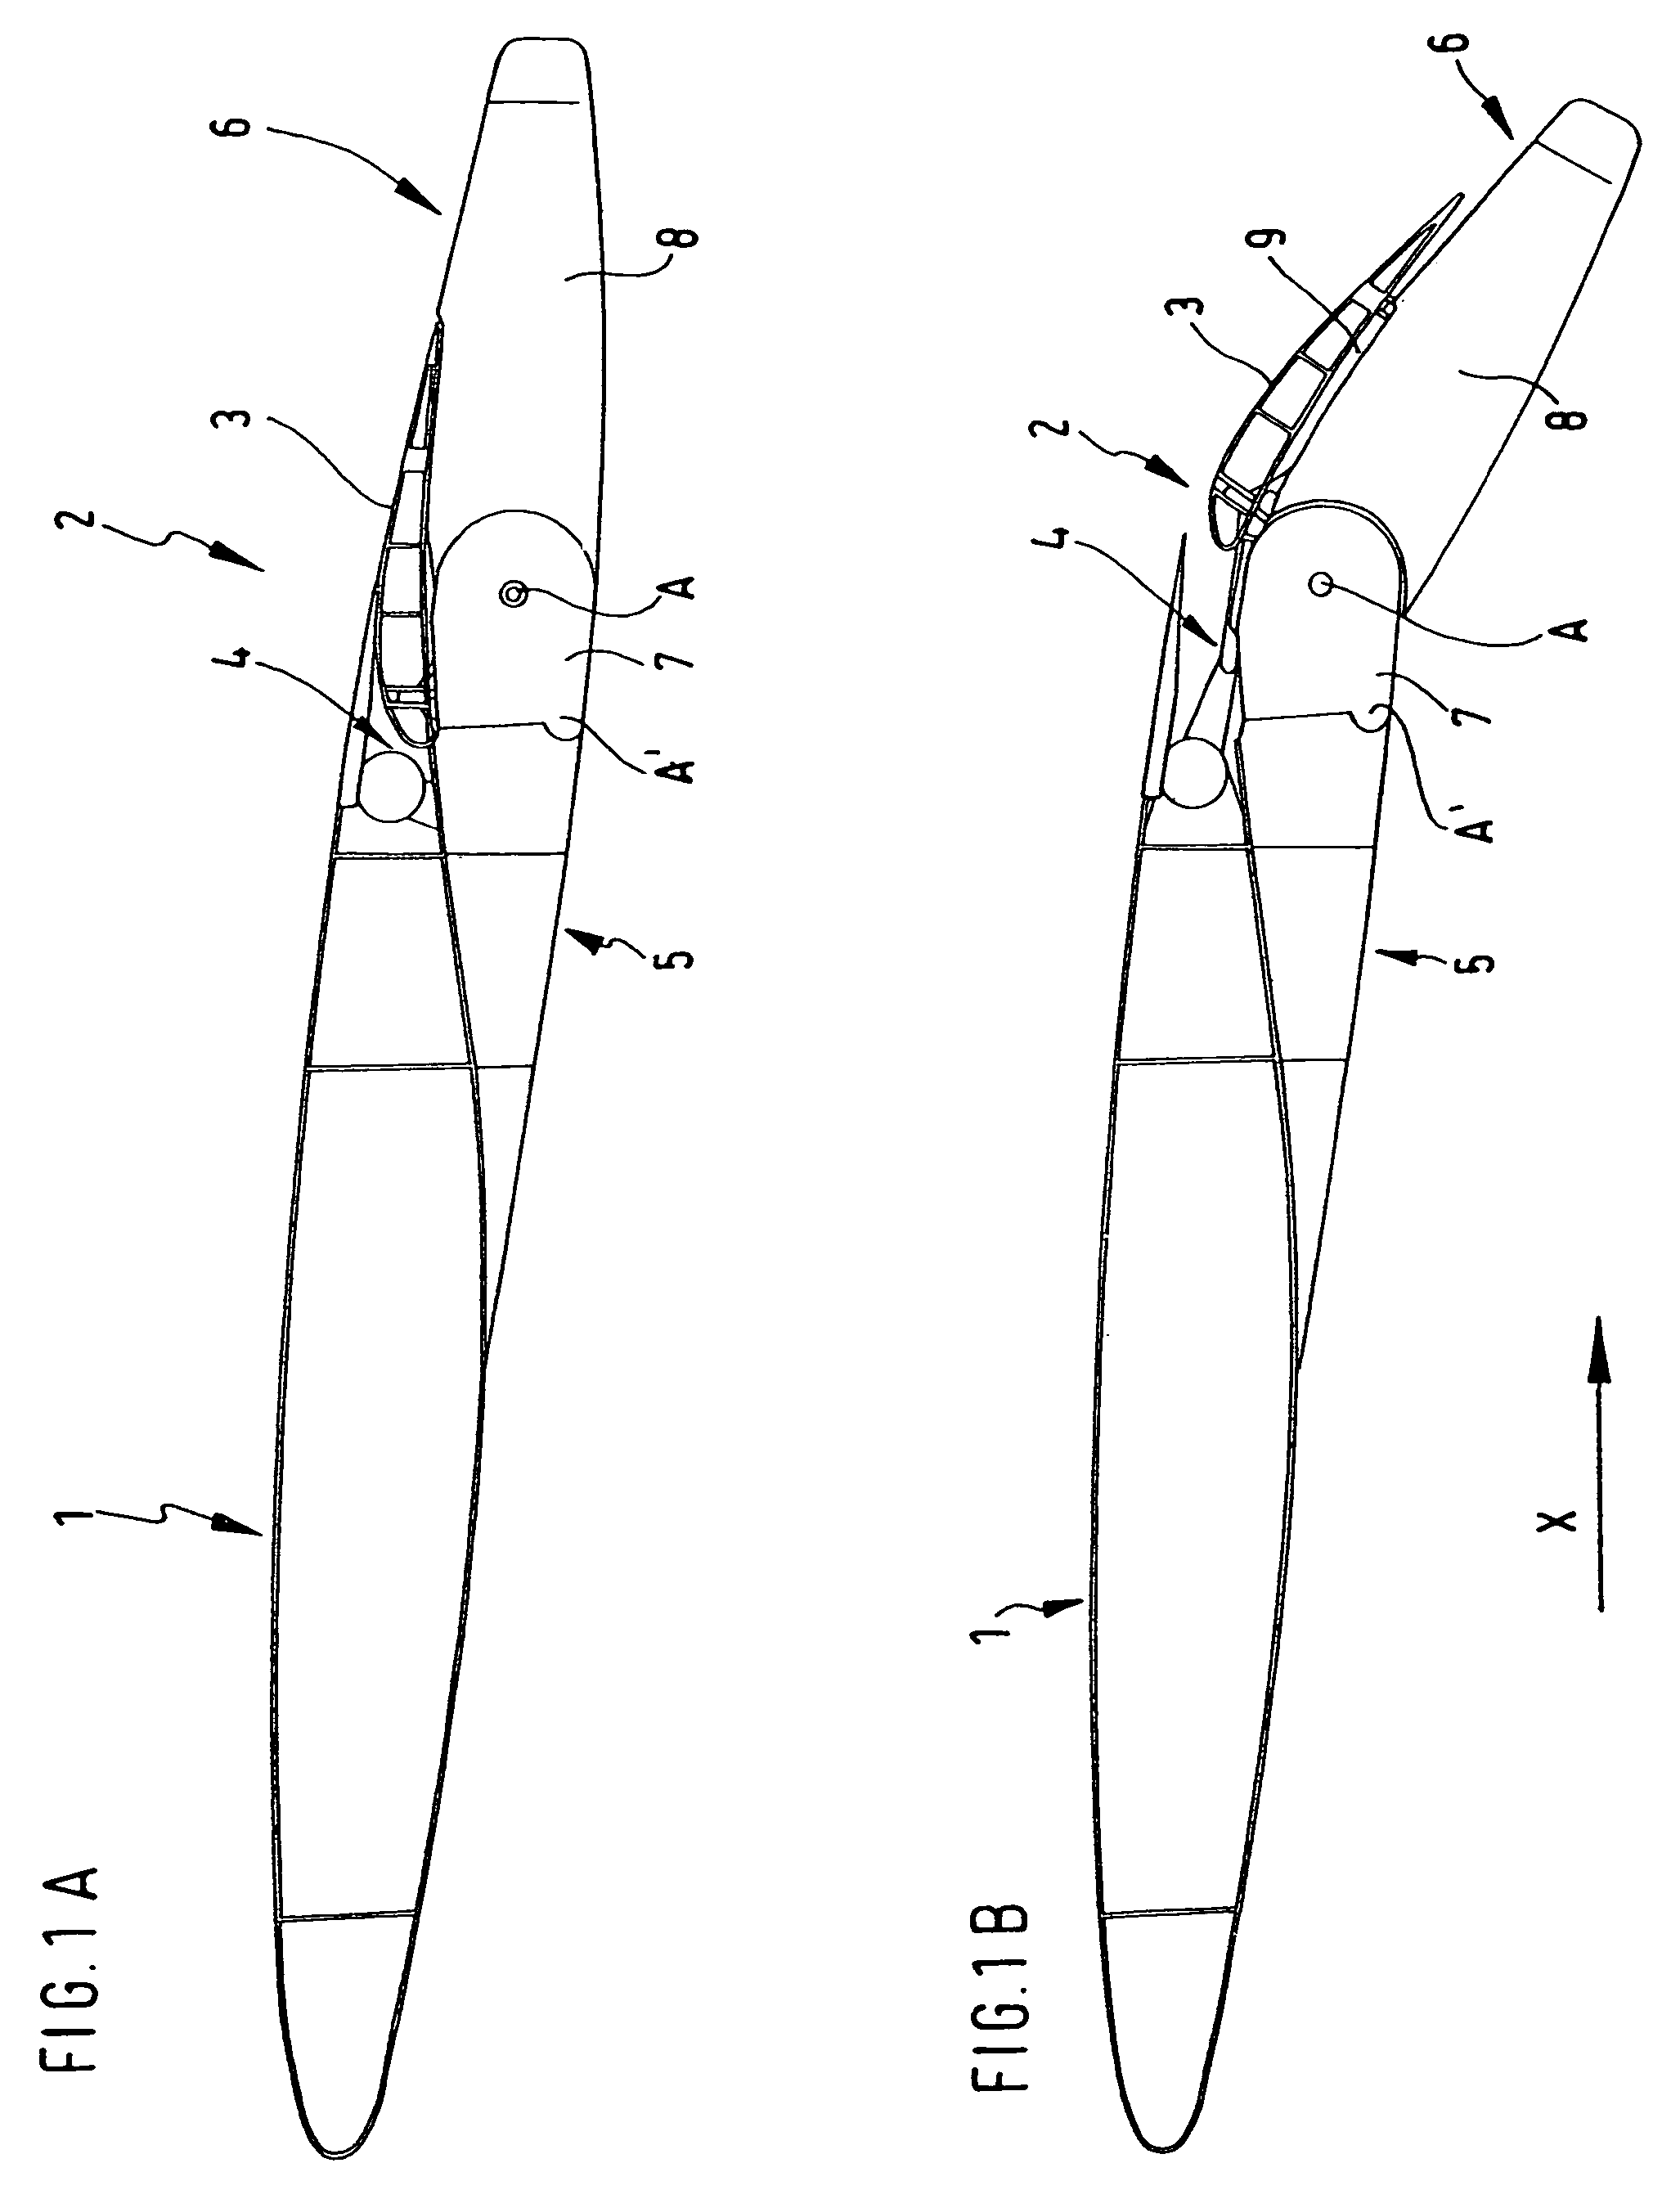 Pivoted flap mechanism for adjusting an aerodynamic pivoted flap associated with a wing